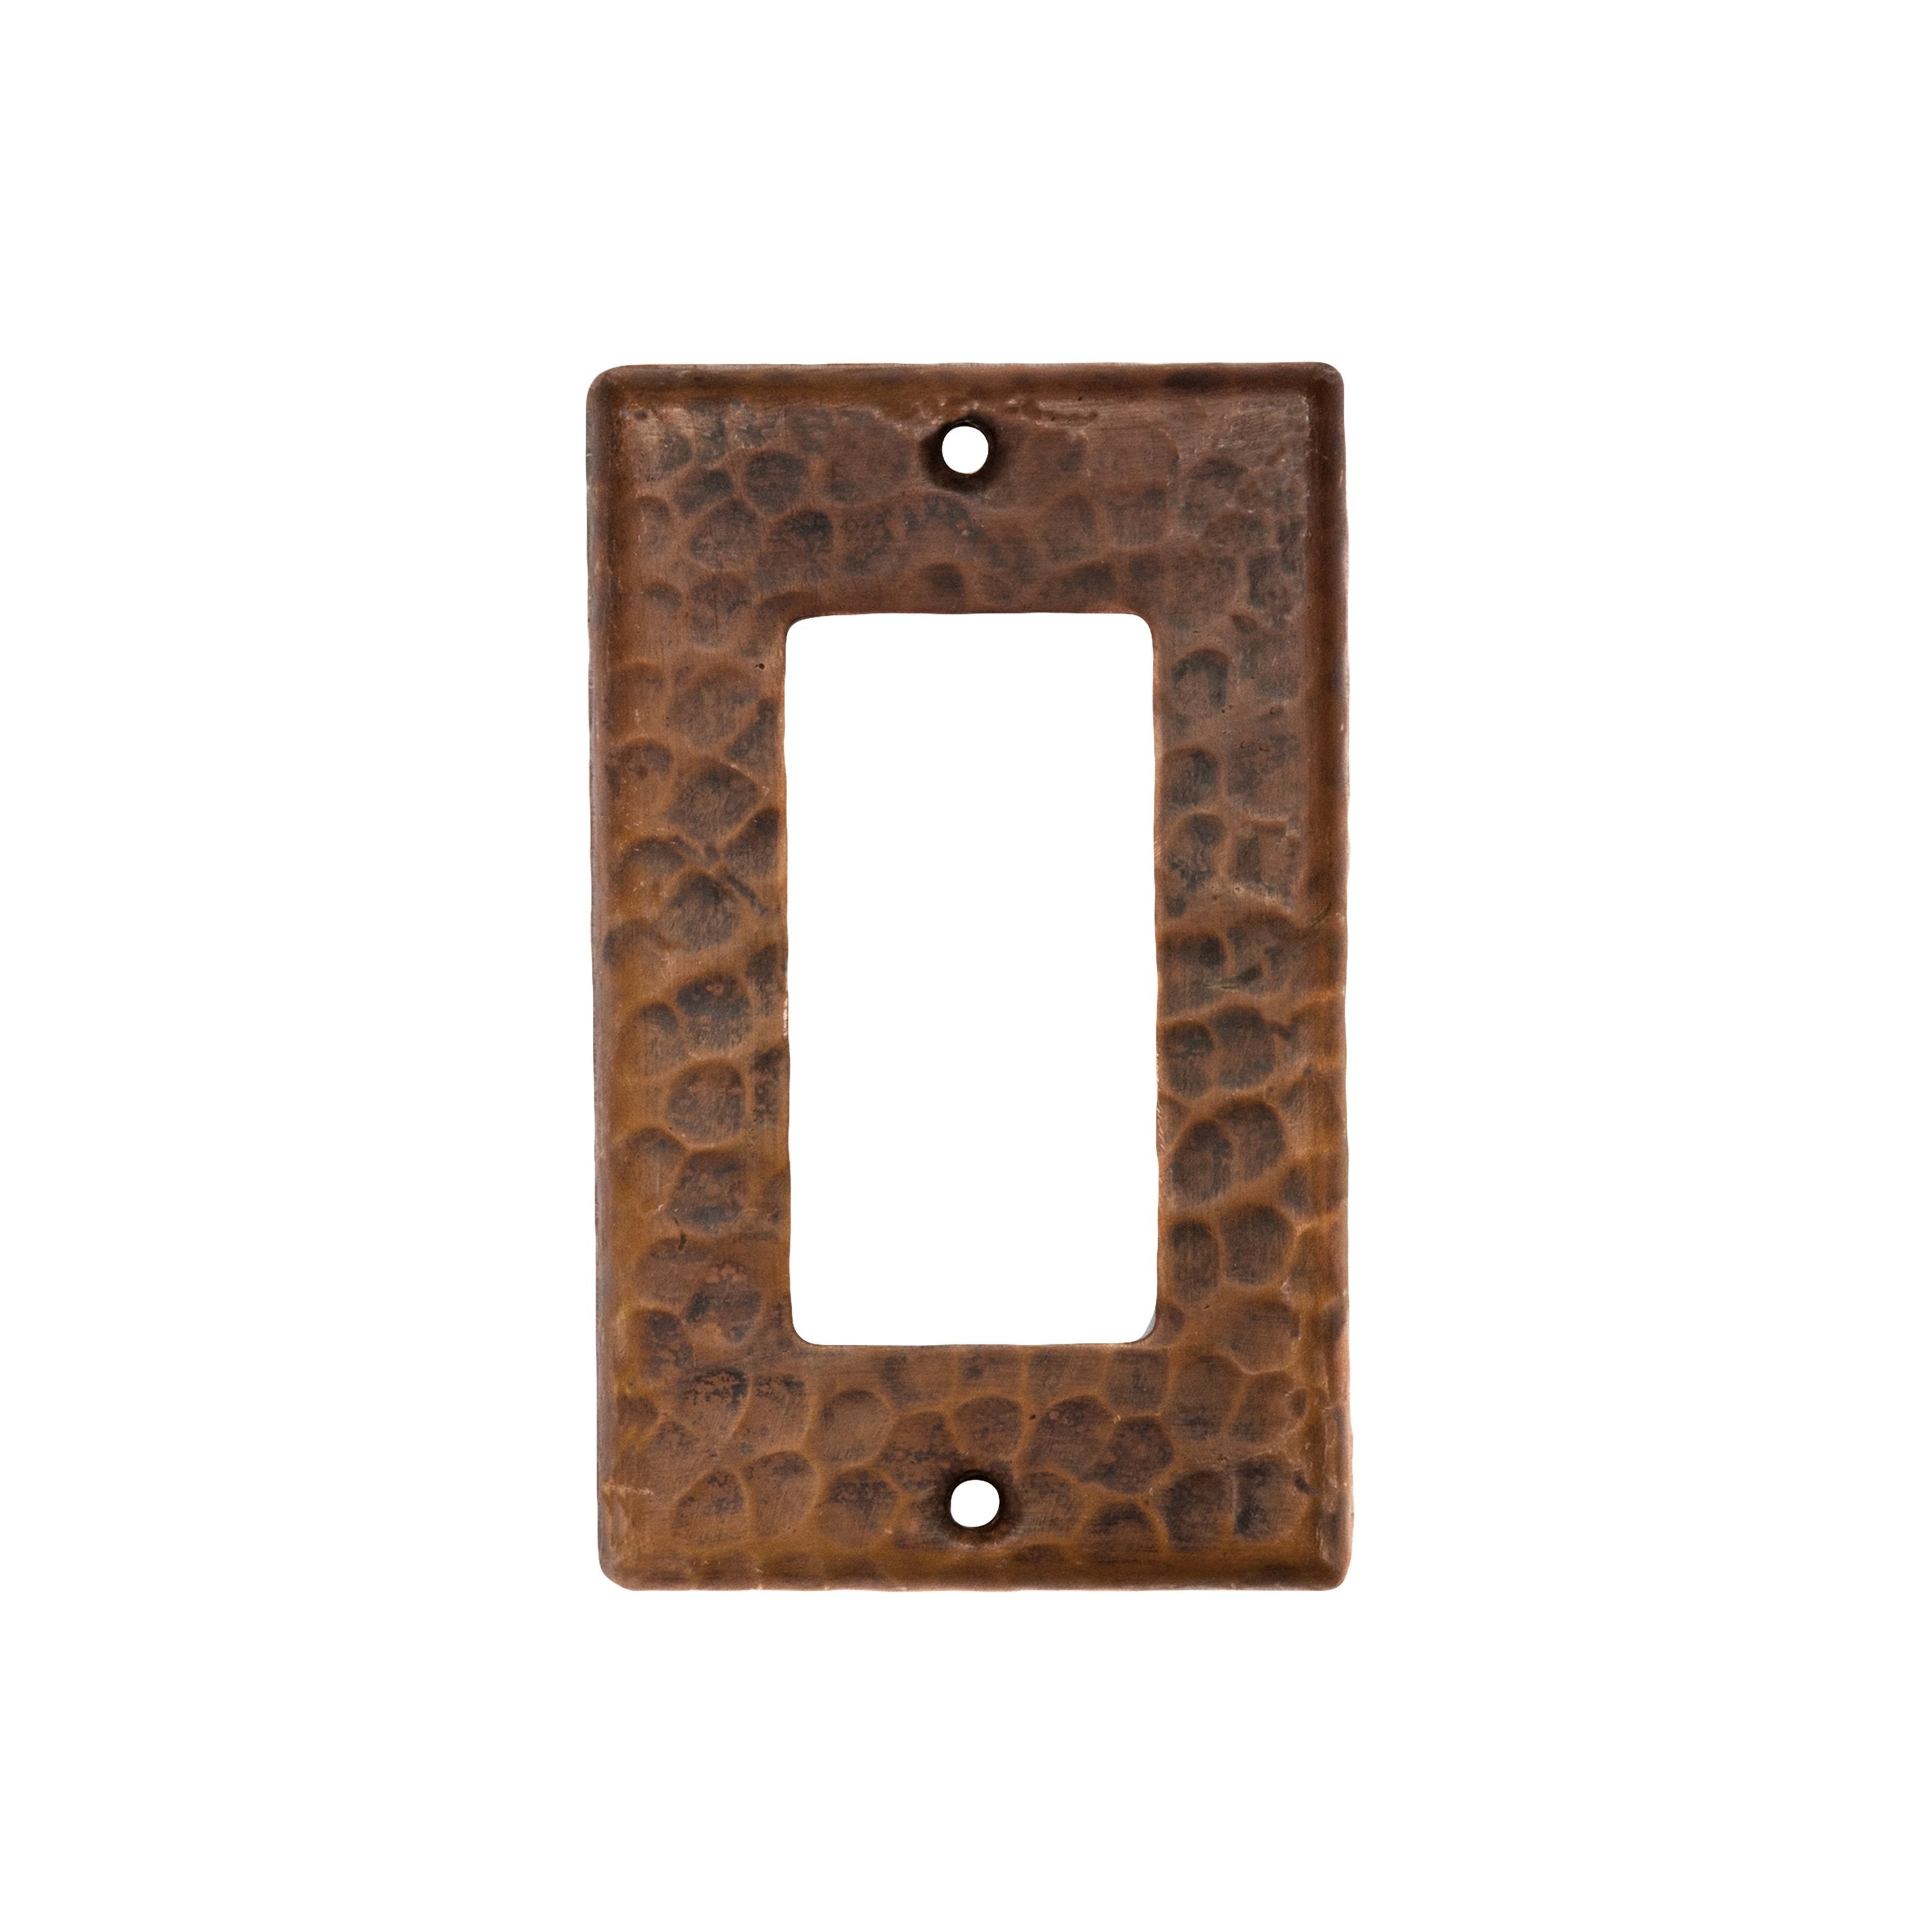 Premier Copper Products Copper Single Ground Fault/Rocker GFI Switchplate Cover - Quantity 4-DirectSinks